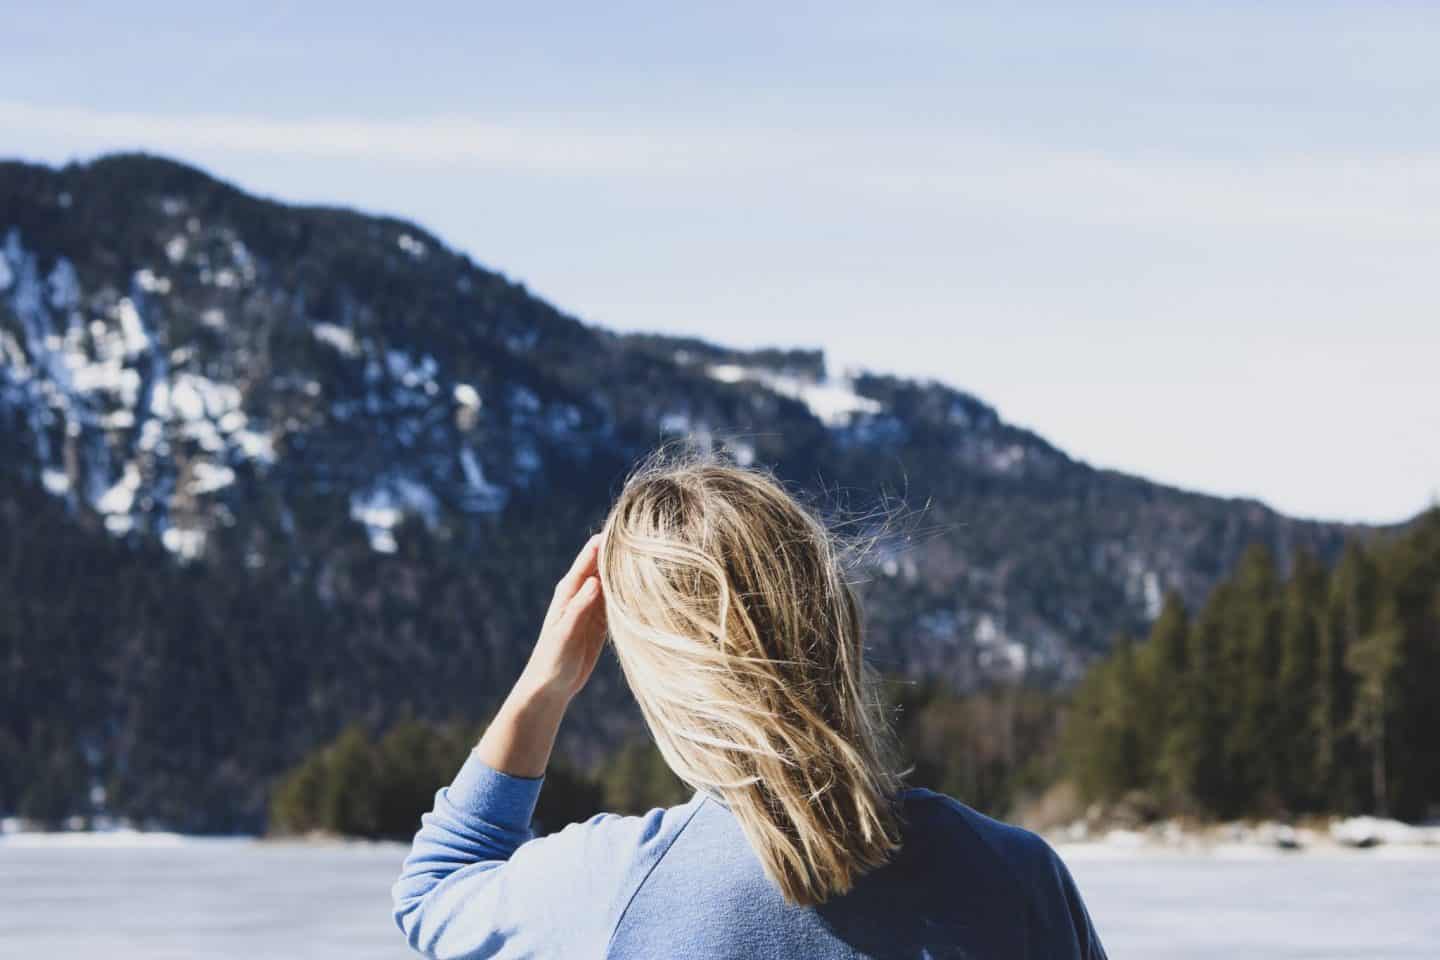 Girl with blonde hair standing in front of a snowy mountain with pine trees